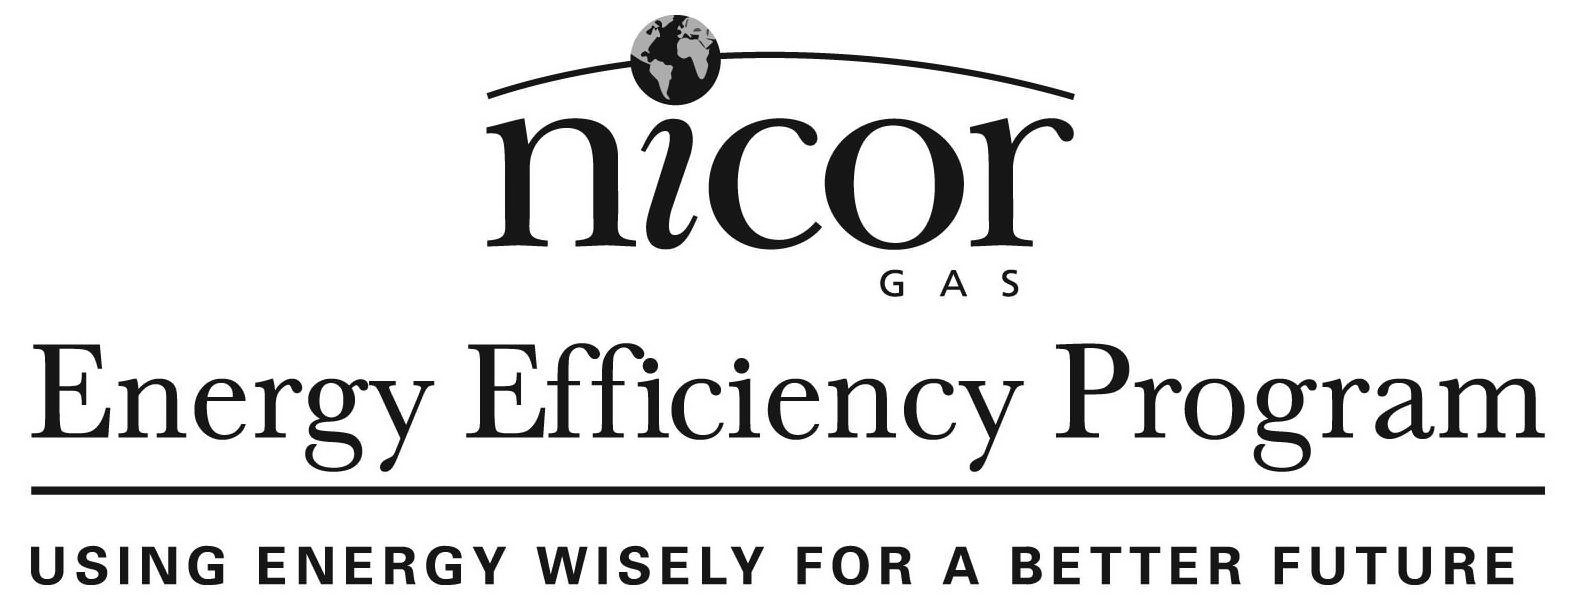  NICOR GAS ENERGY EFFICIENCY PROGRAM USING ENERGY WISELY FOR A BETTER FUTURE